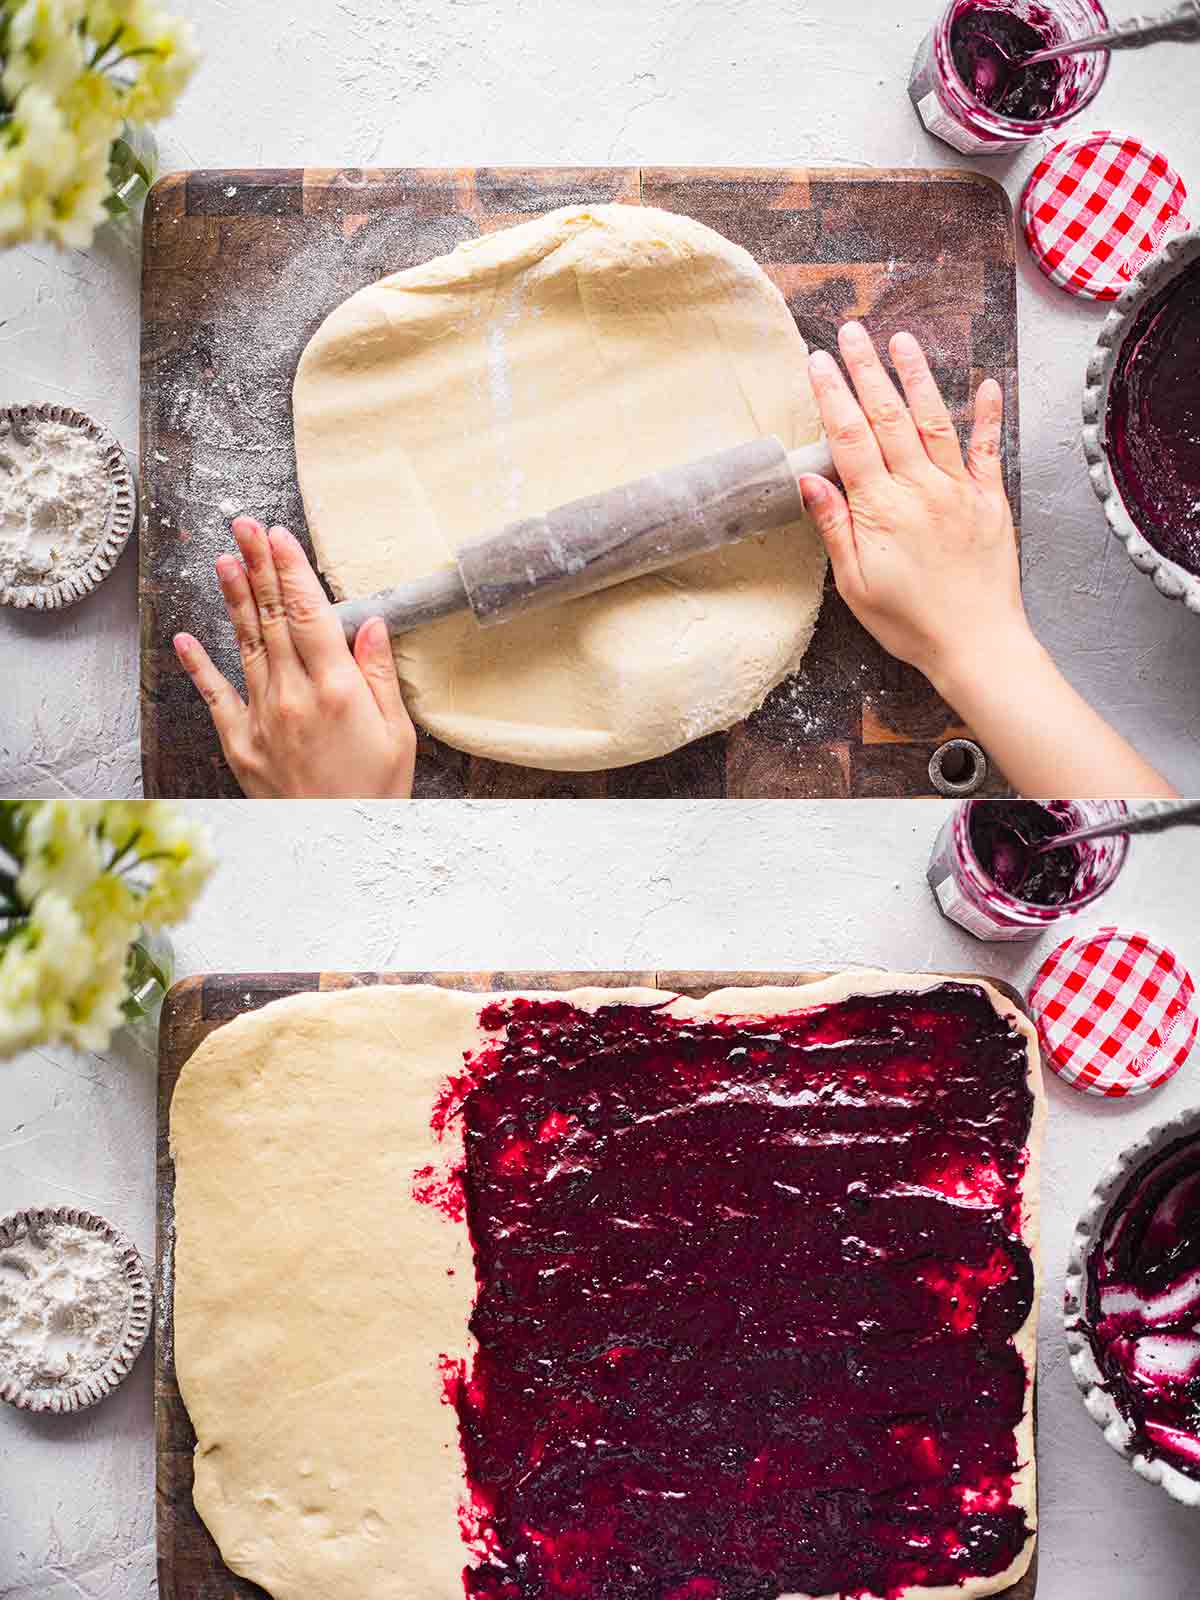 Two image collage of rolling out dough and spreading jam on the surface.